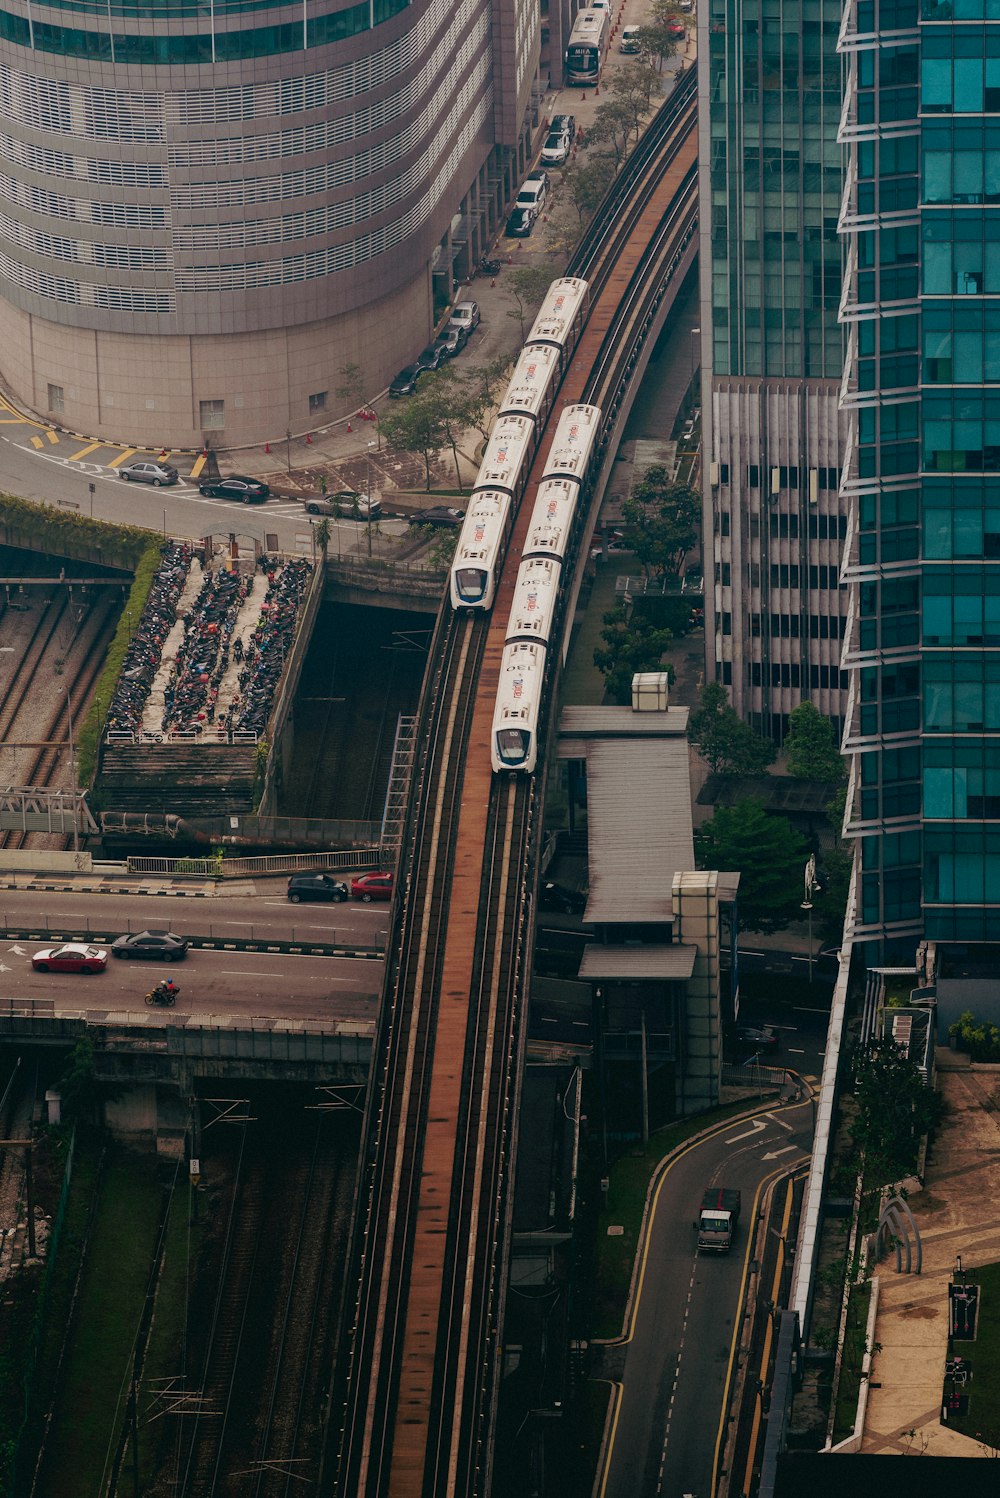 an aerial view of a train on the tracks in a city